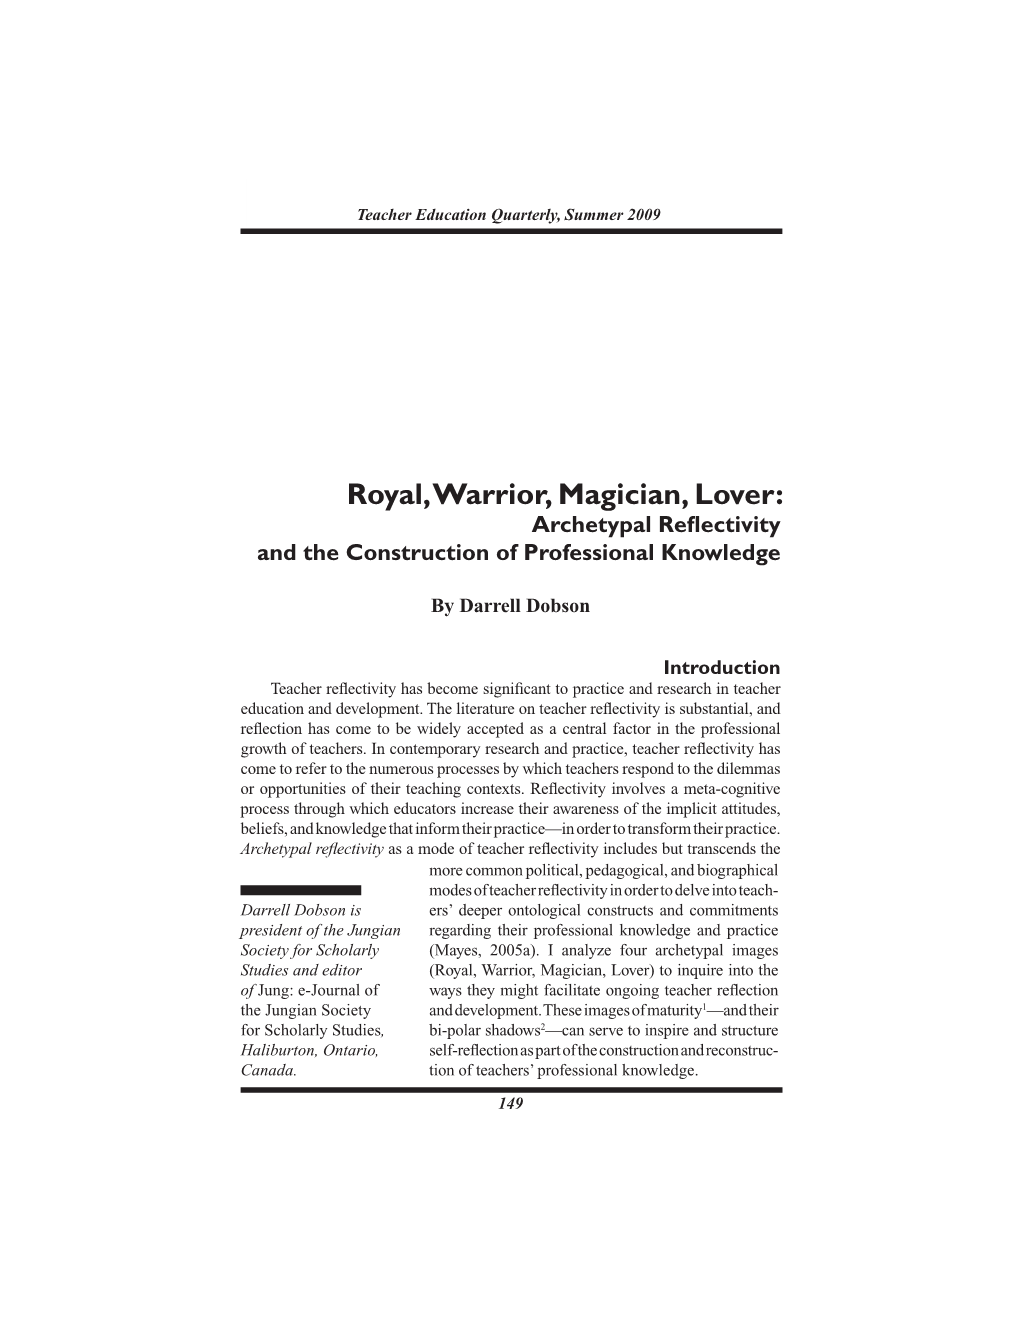 Royal, Warrior, Magician, Lover: Archetypal Reflectivity and the Construction of Professional Knowledge